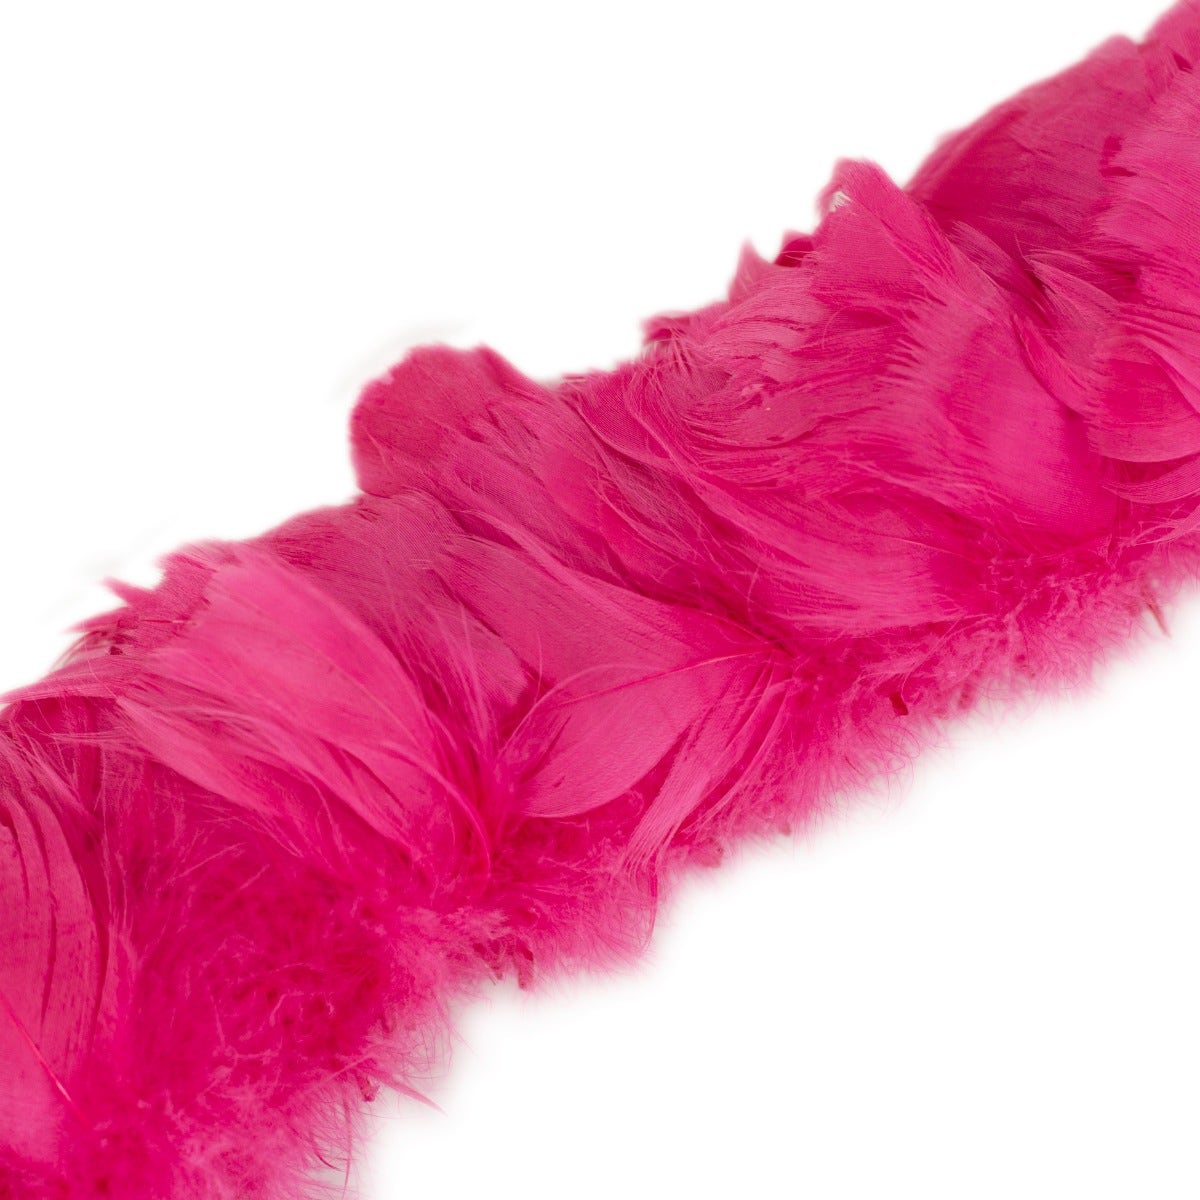 Strung Goose Coquille Feathers 3-4" -- 1/4 lb-Raspberry Sorbet